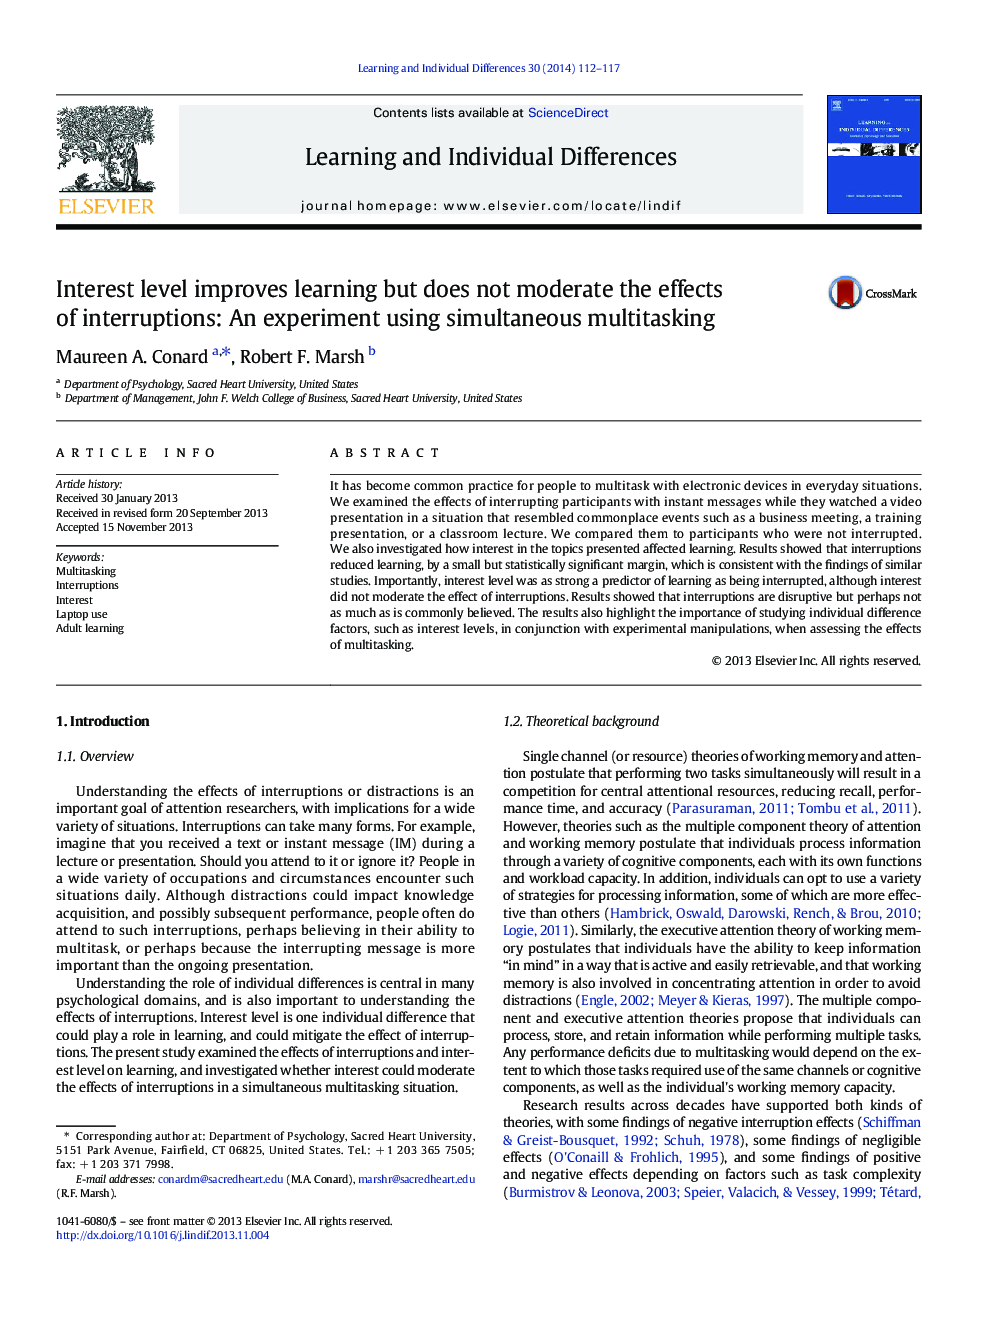 Interest level improves learning but does not moderate the effects of interruptions: An experiment using simultaneous multitasking